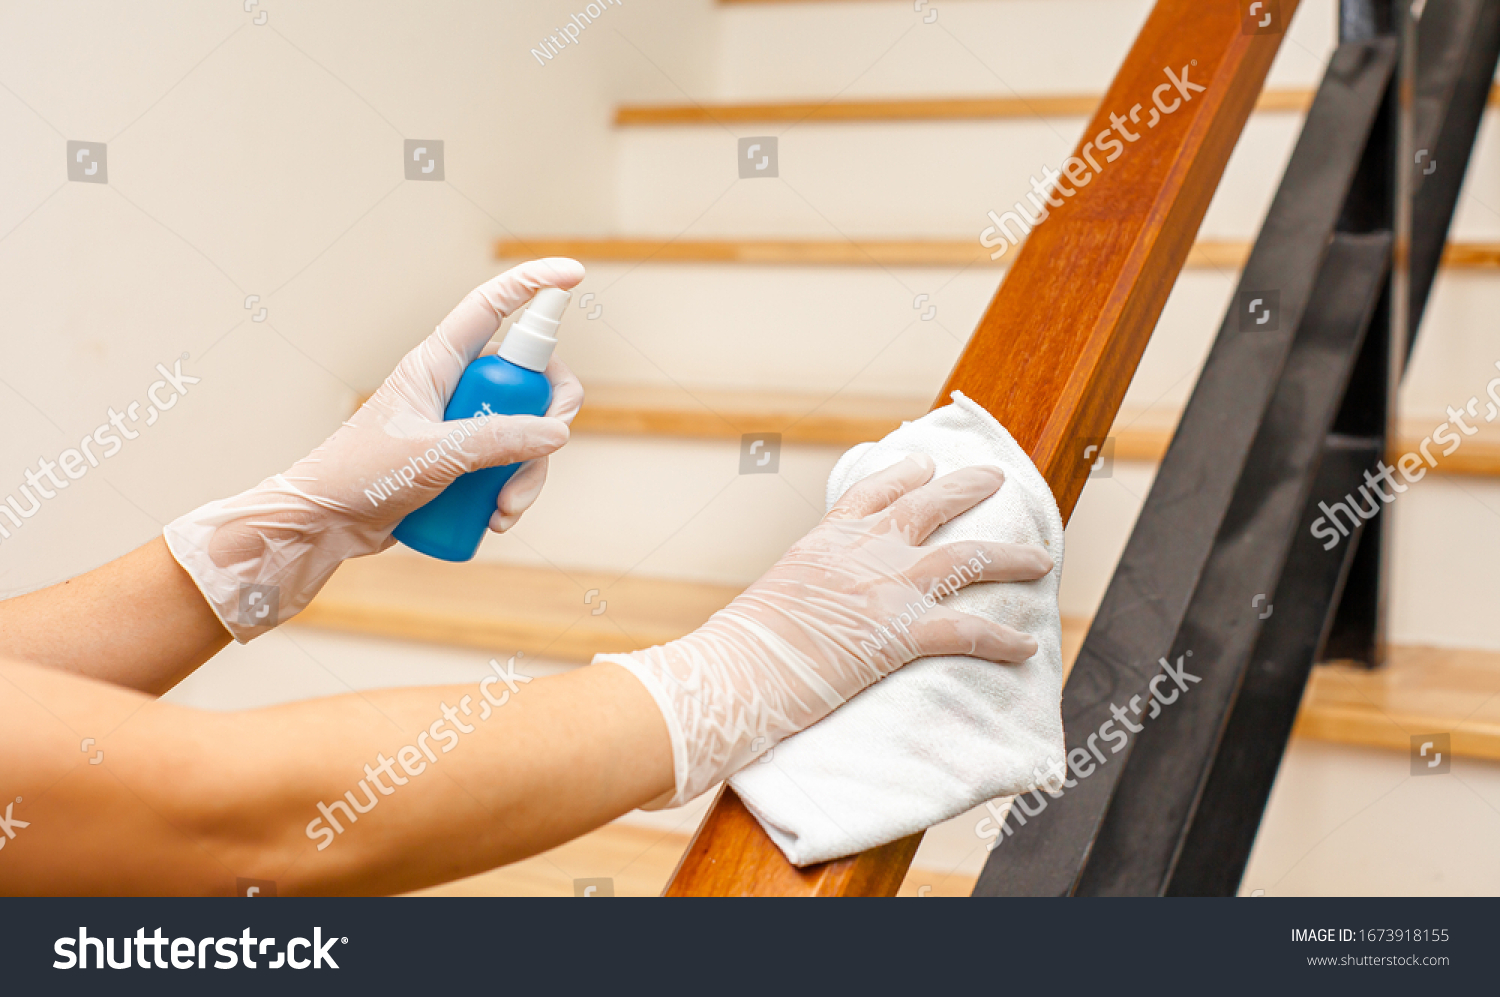 Deep cleaning for Covid-19 disease prevention. alcohol,disinfectant spray on Wipes of Banister in home for safety,infection of Covid-19 virus,contamination,germs,bacteria that are frequently touched . #1673918155